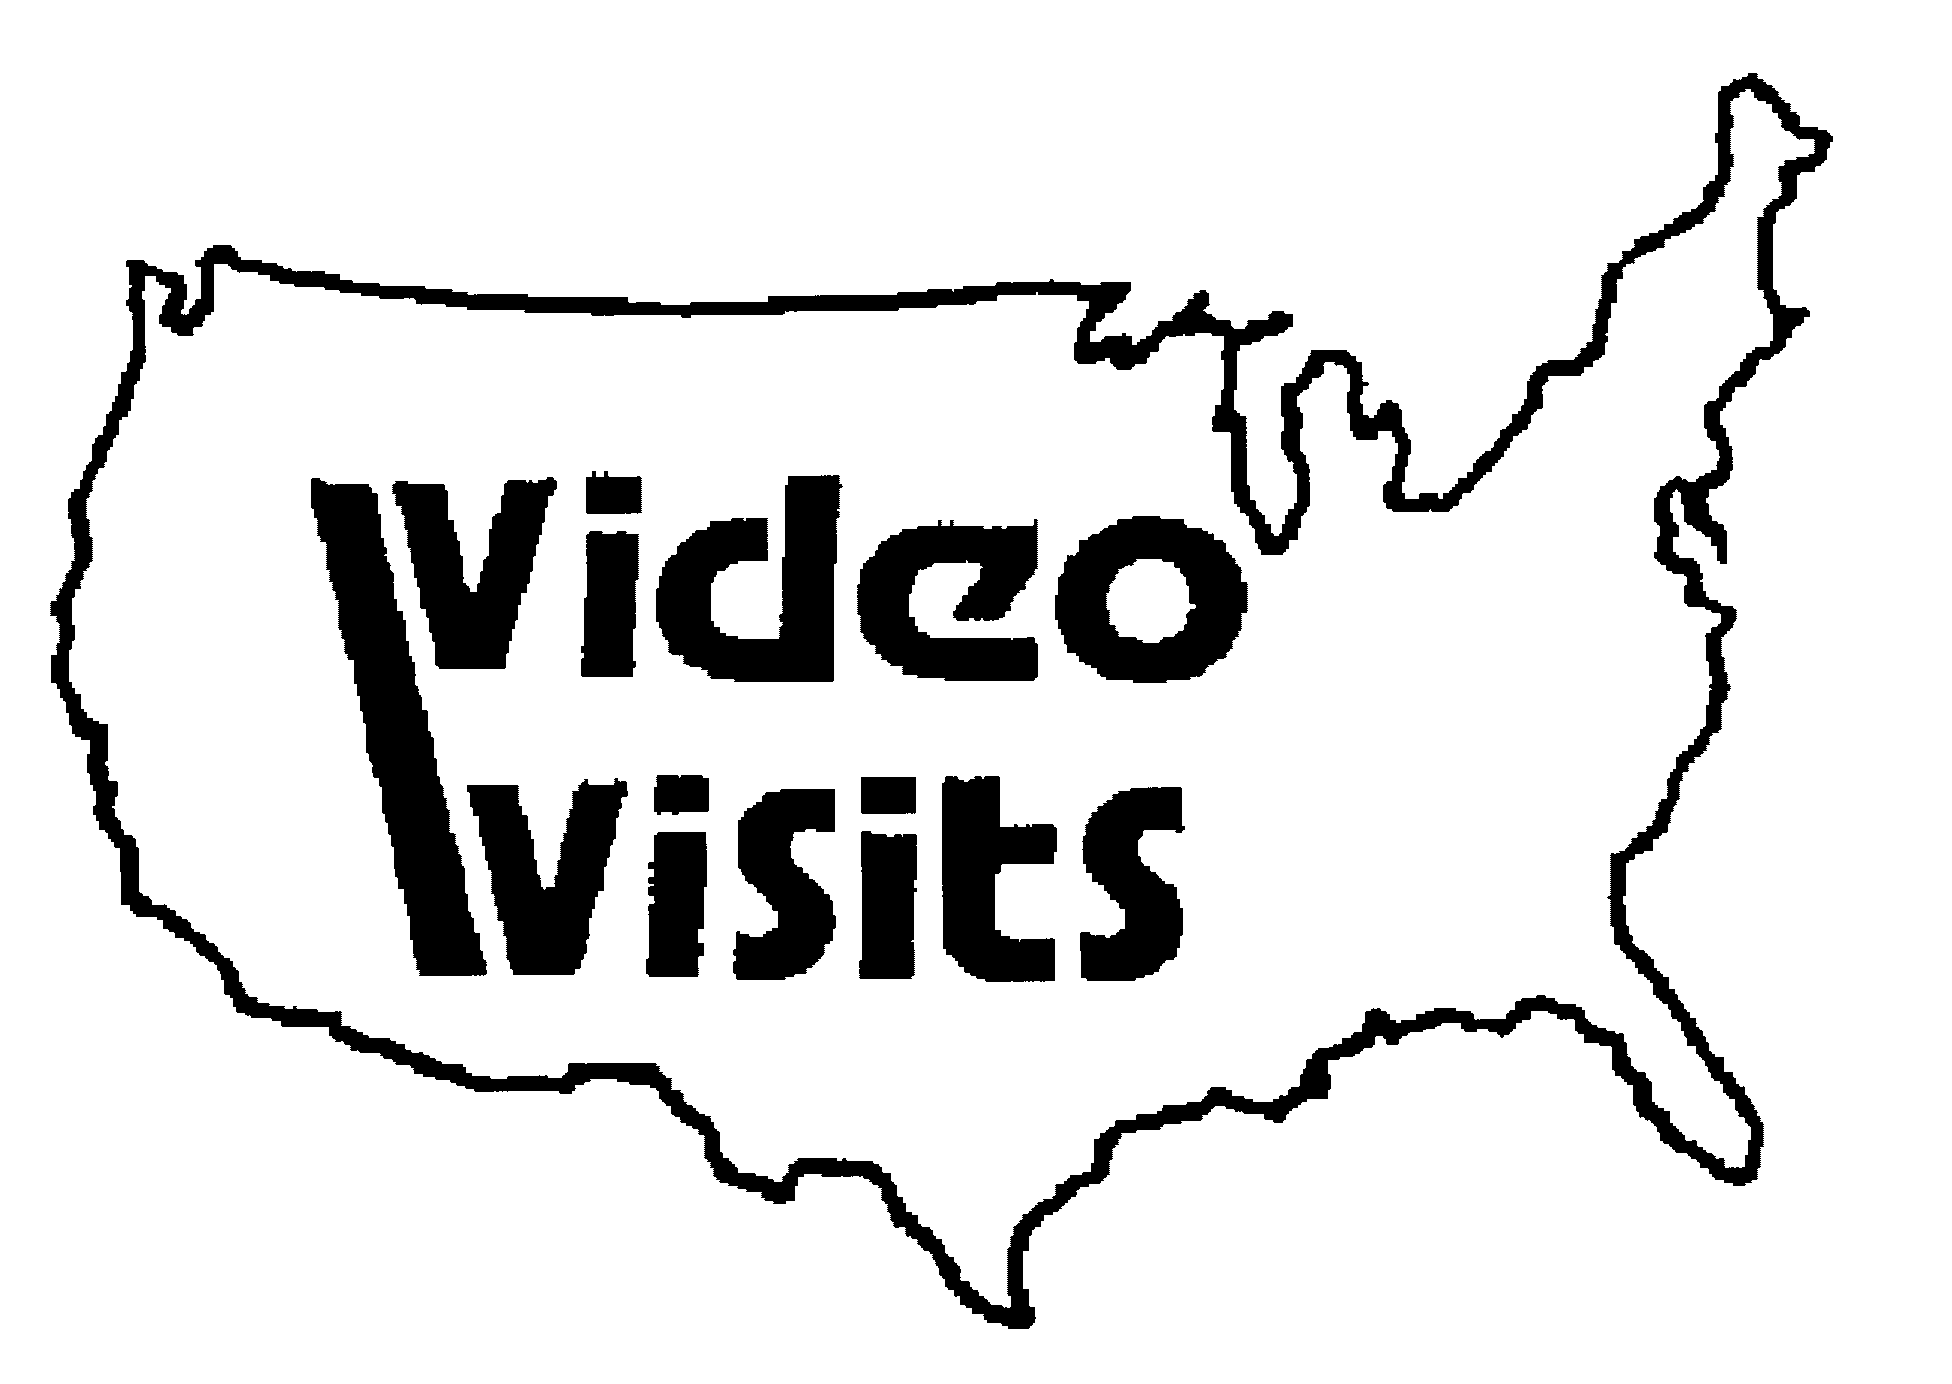 VIDEO VISITS